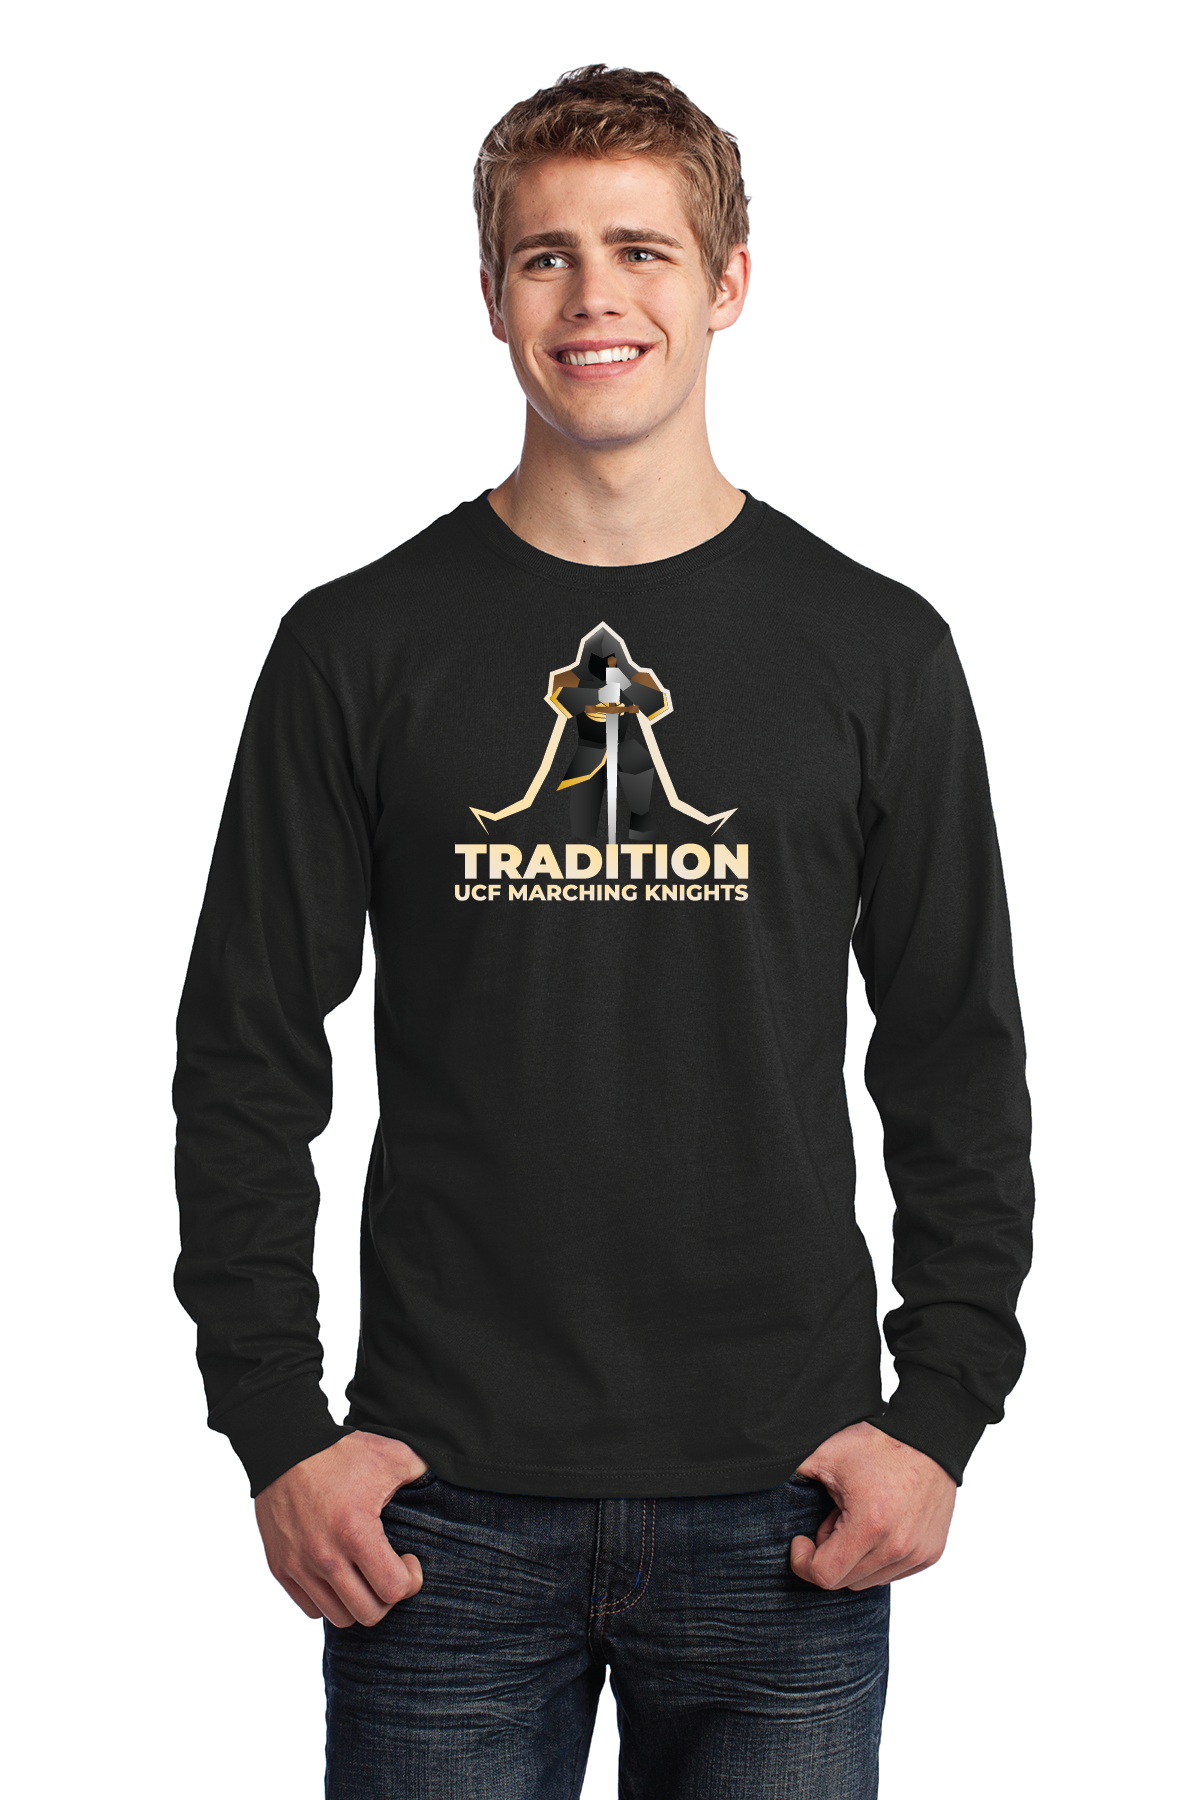 "Tradition" Drum Major Long Sleeve T-Shirt